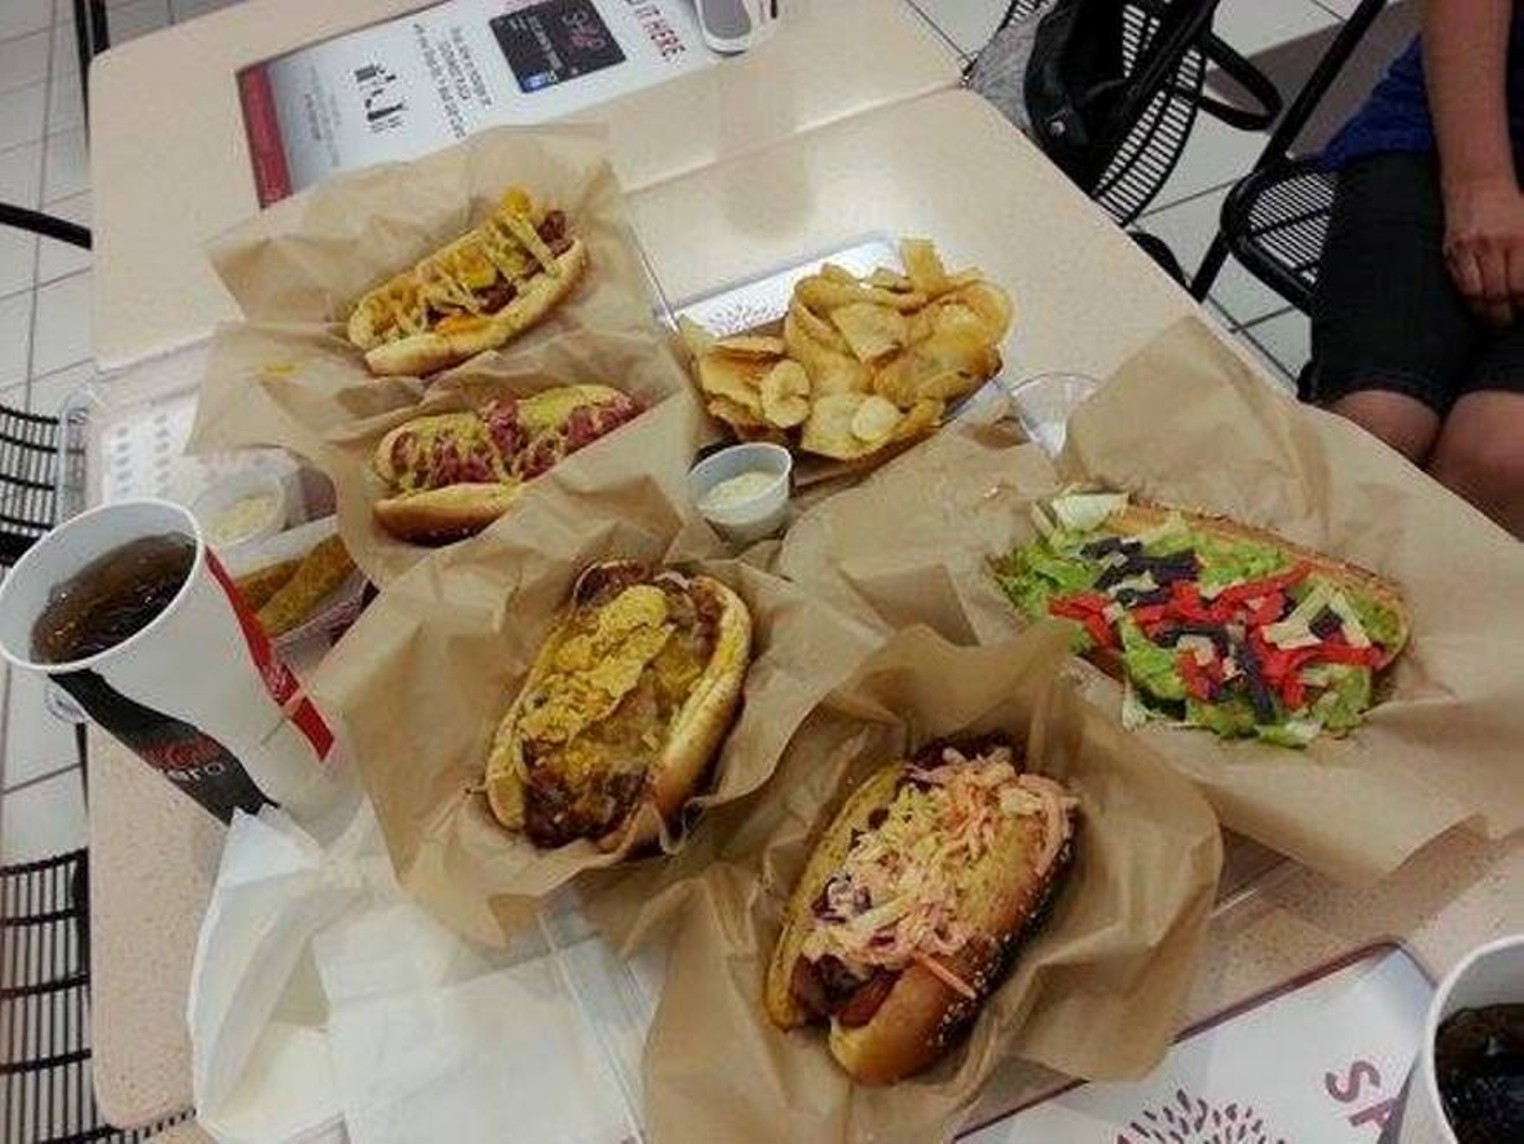 Billy's Gourmet Hot Dogs. The Best Authentic Hot Dogs in Denver